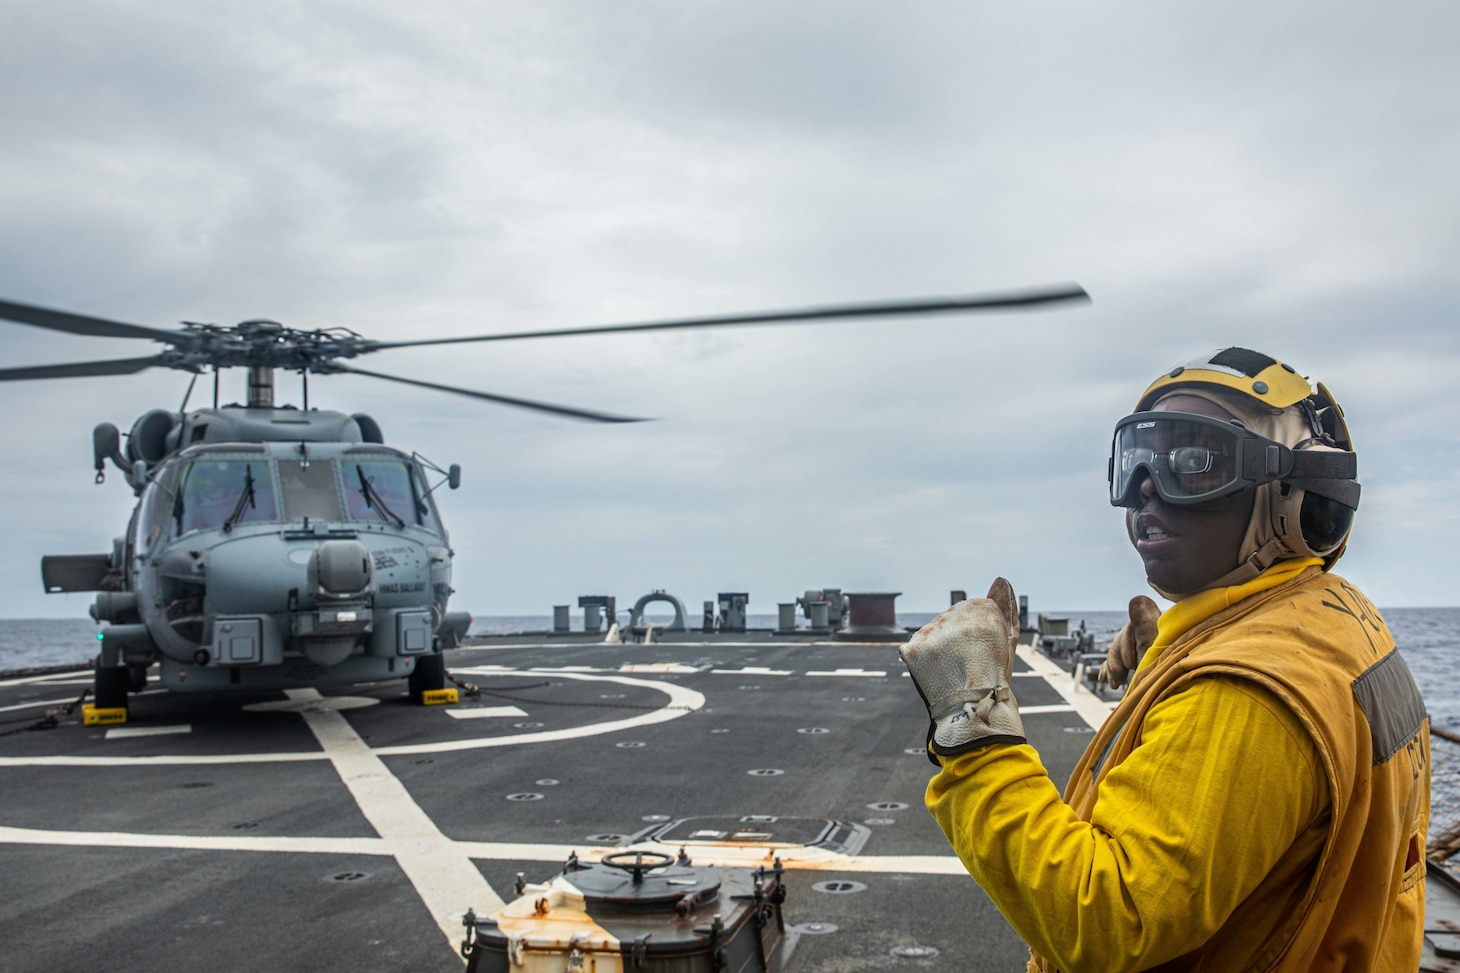 Boatswain’s Mate 2nd Class Daniel Branham, from Dalton, Ga., signals to an MH-60R Sea Hawk assigned to the Royal Australian Navy Anzac-class frigate HMAS Ballarat (FFH 155) on the flight deck of Arleigh Burke-class guided-missile destroyer USS Curtis Wilbur (DDG 54). Curtis Wilbur is assigned to Commander, Task Force 71/Destroyer Squadron (DESRON) 15, the Navy’s largest forward-deployed DESRON and U.S. 7th Fleet’s principal surface force. (U.S. Navy photo by Mass Communication Specialist 3rd Class Zenaida Roth)